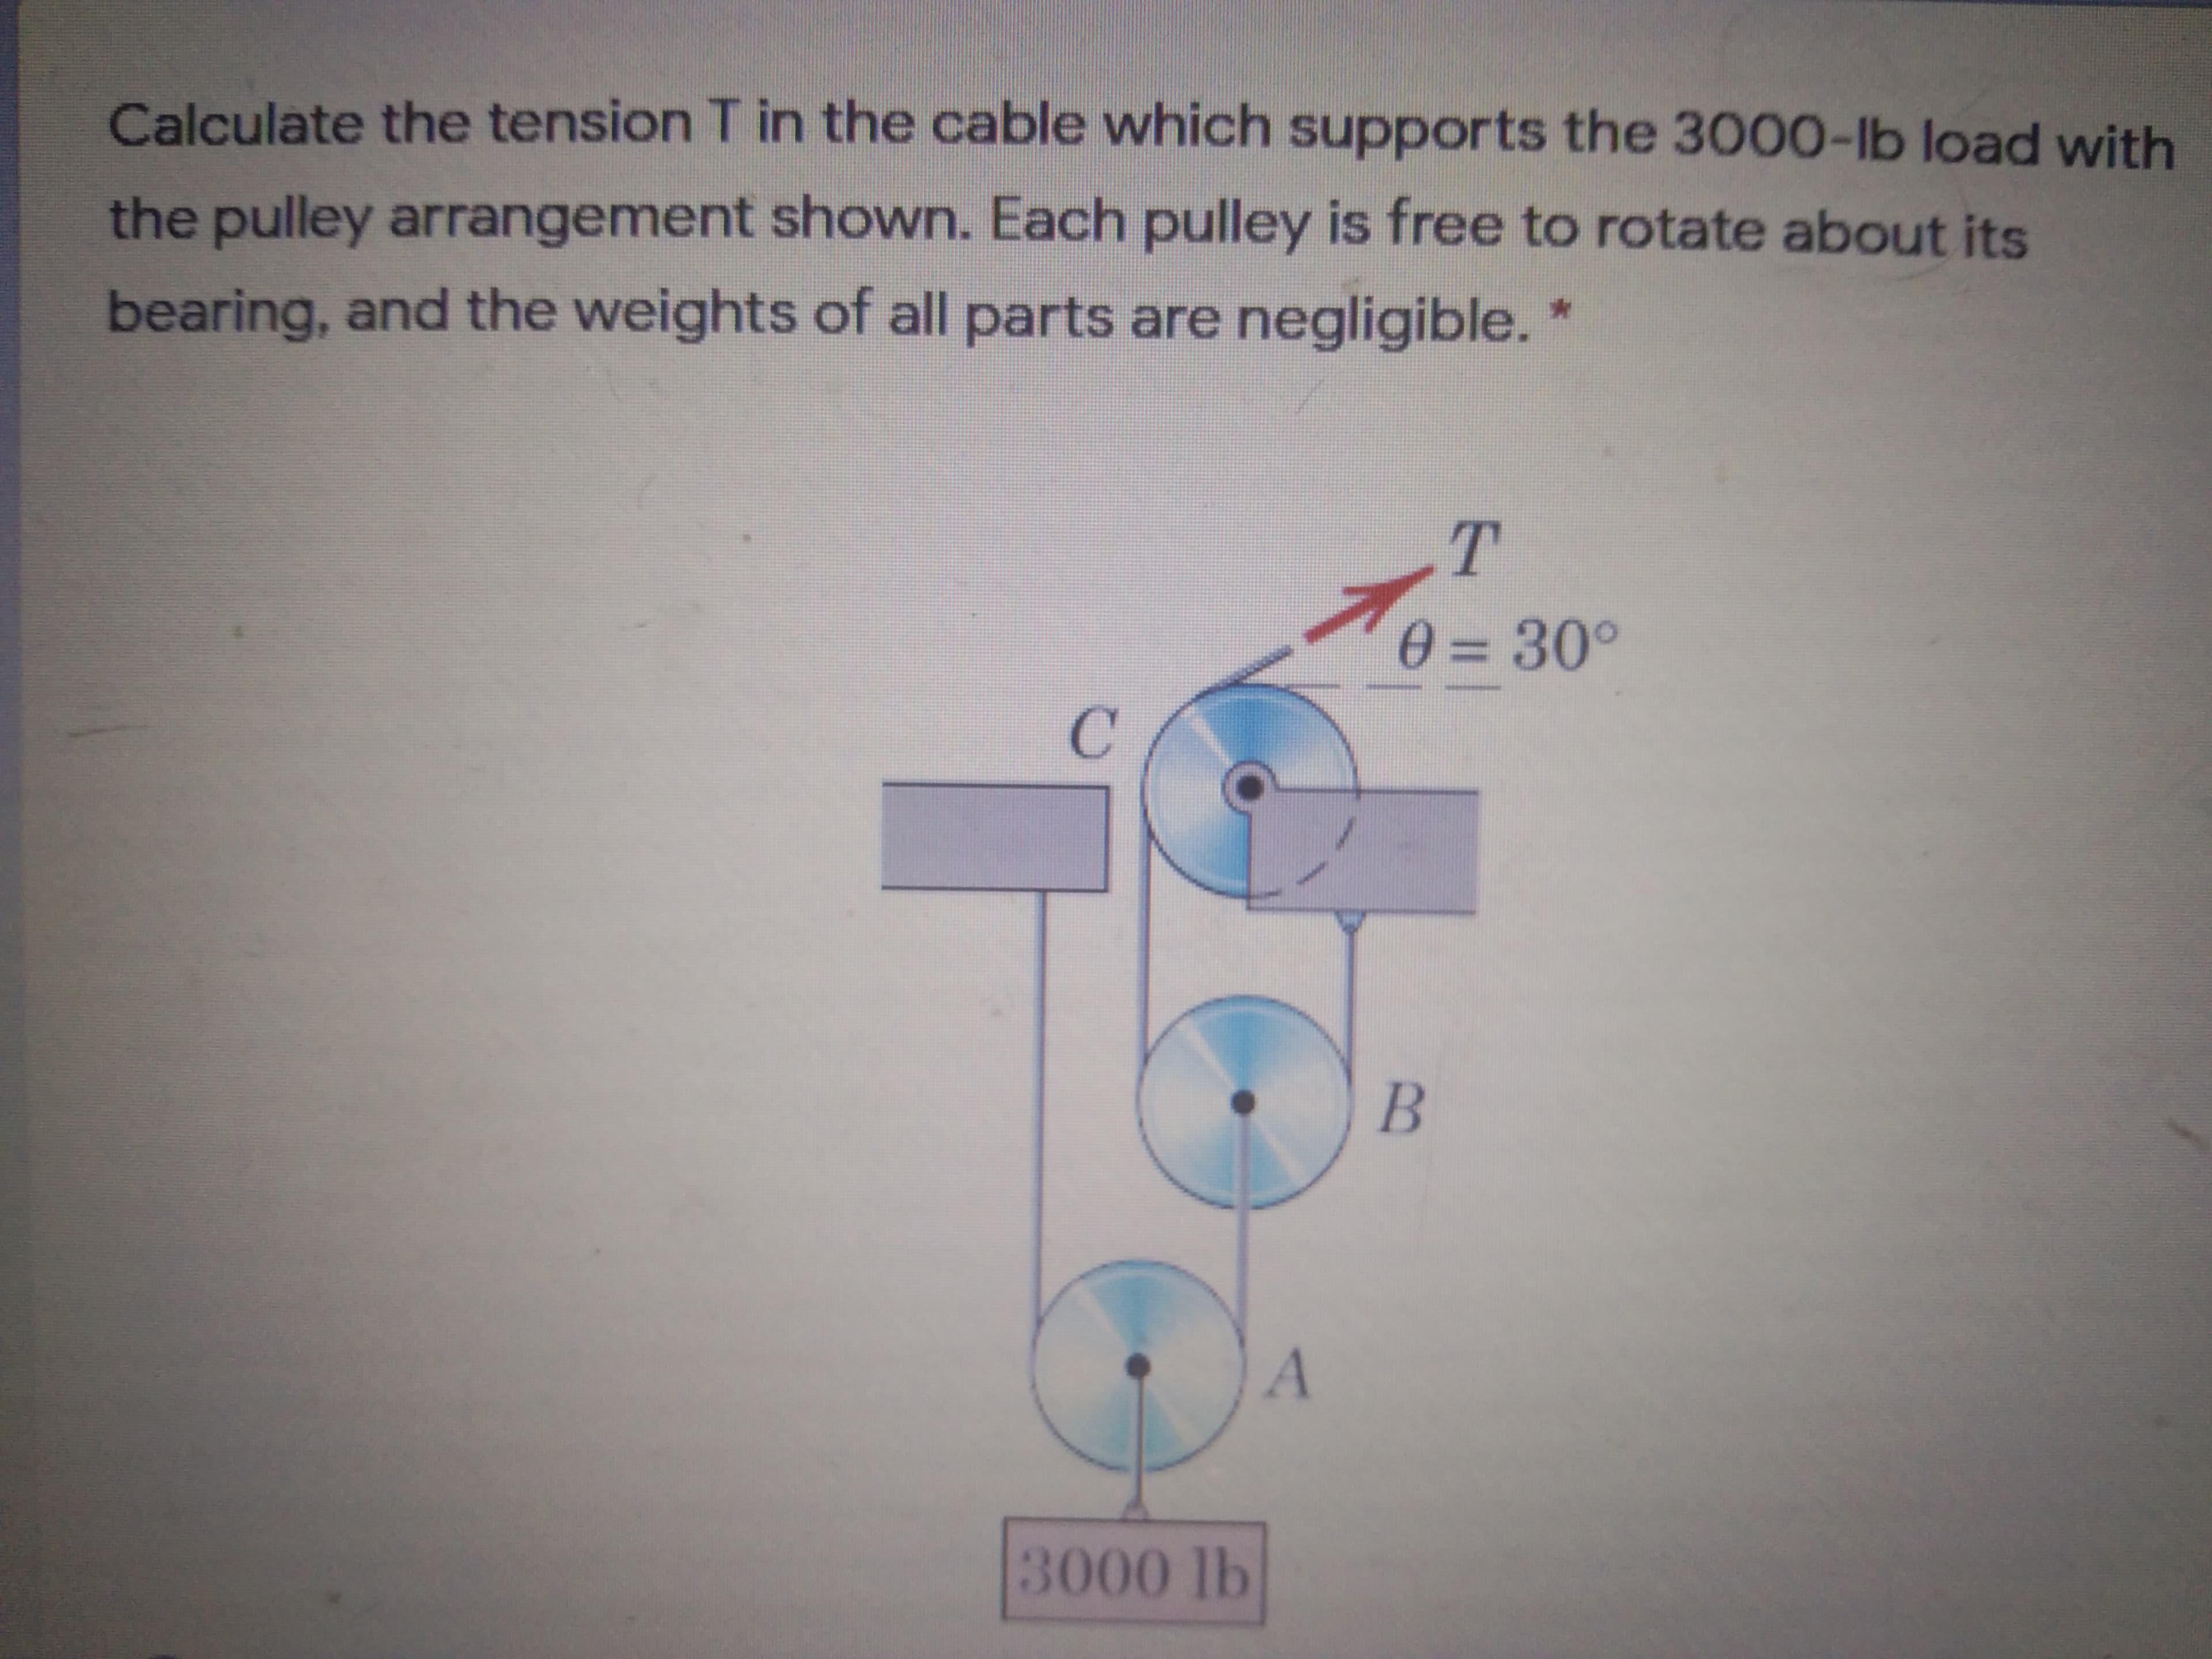 Calculate the tension T in the cable which supports the 3000-Ilb load with
the pulley arrangement shown. Each pulley is free to rotate about its
bearing, and the weights of all parts are negligible.
